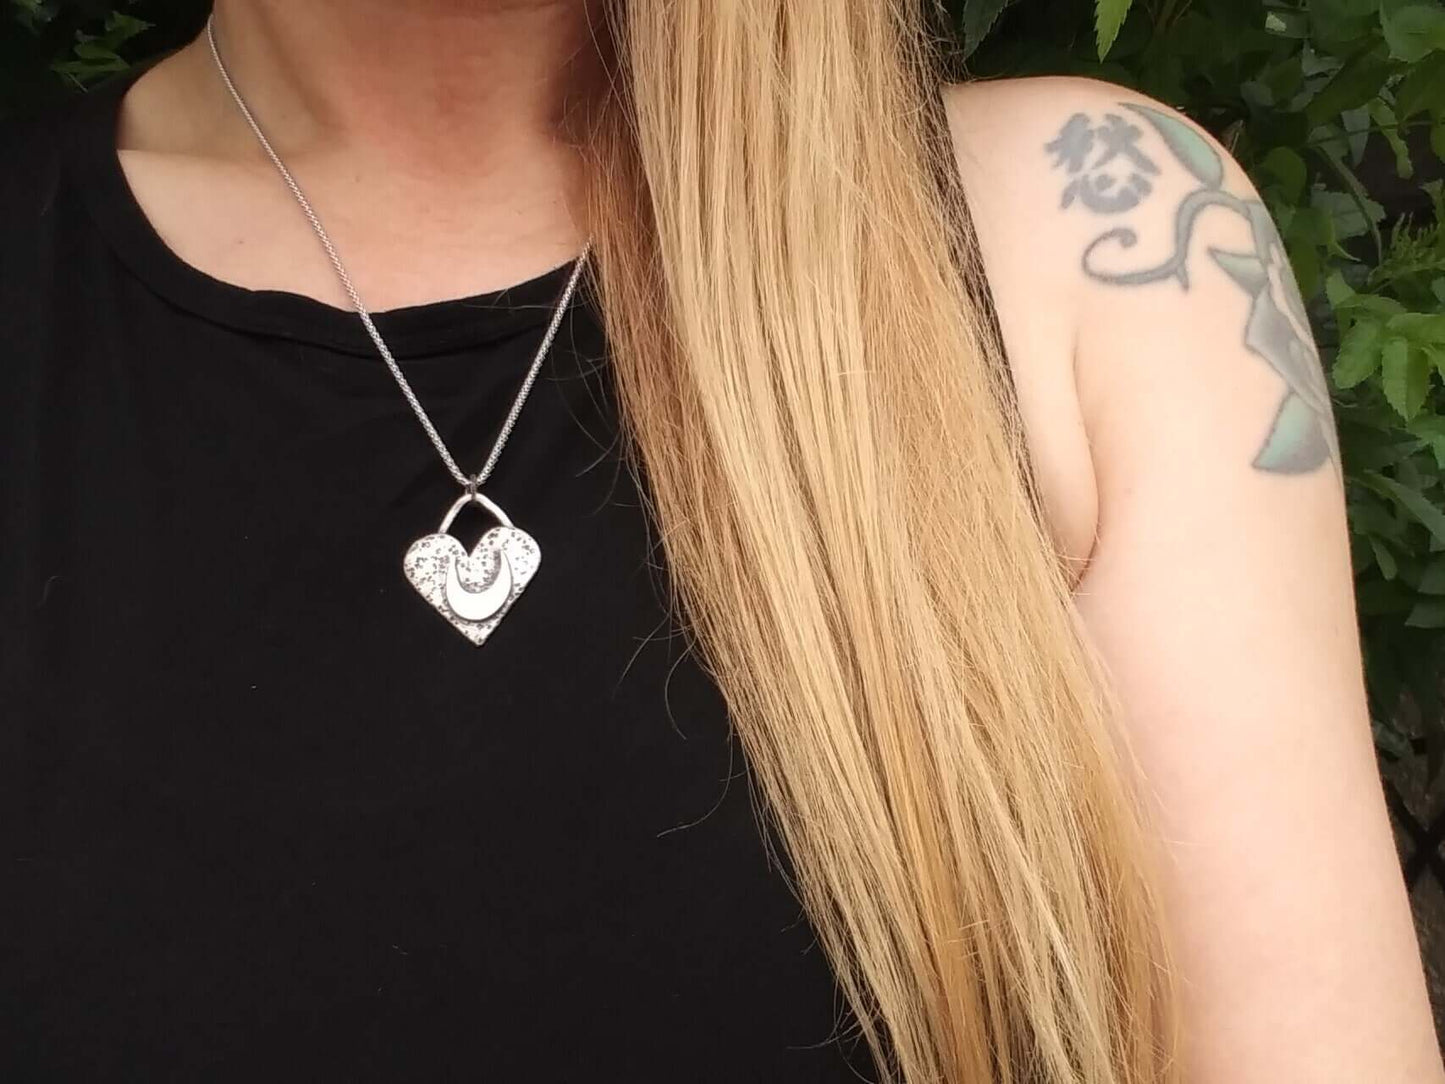 Silver heart charm worn by blonde model in sleeveless black top with tattoos